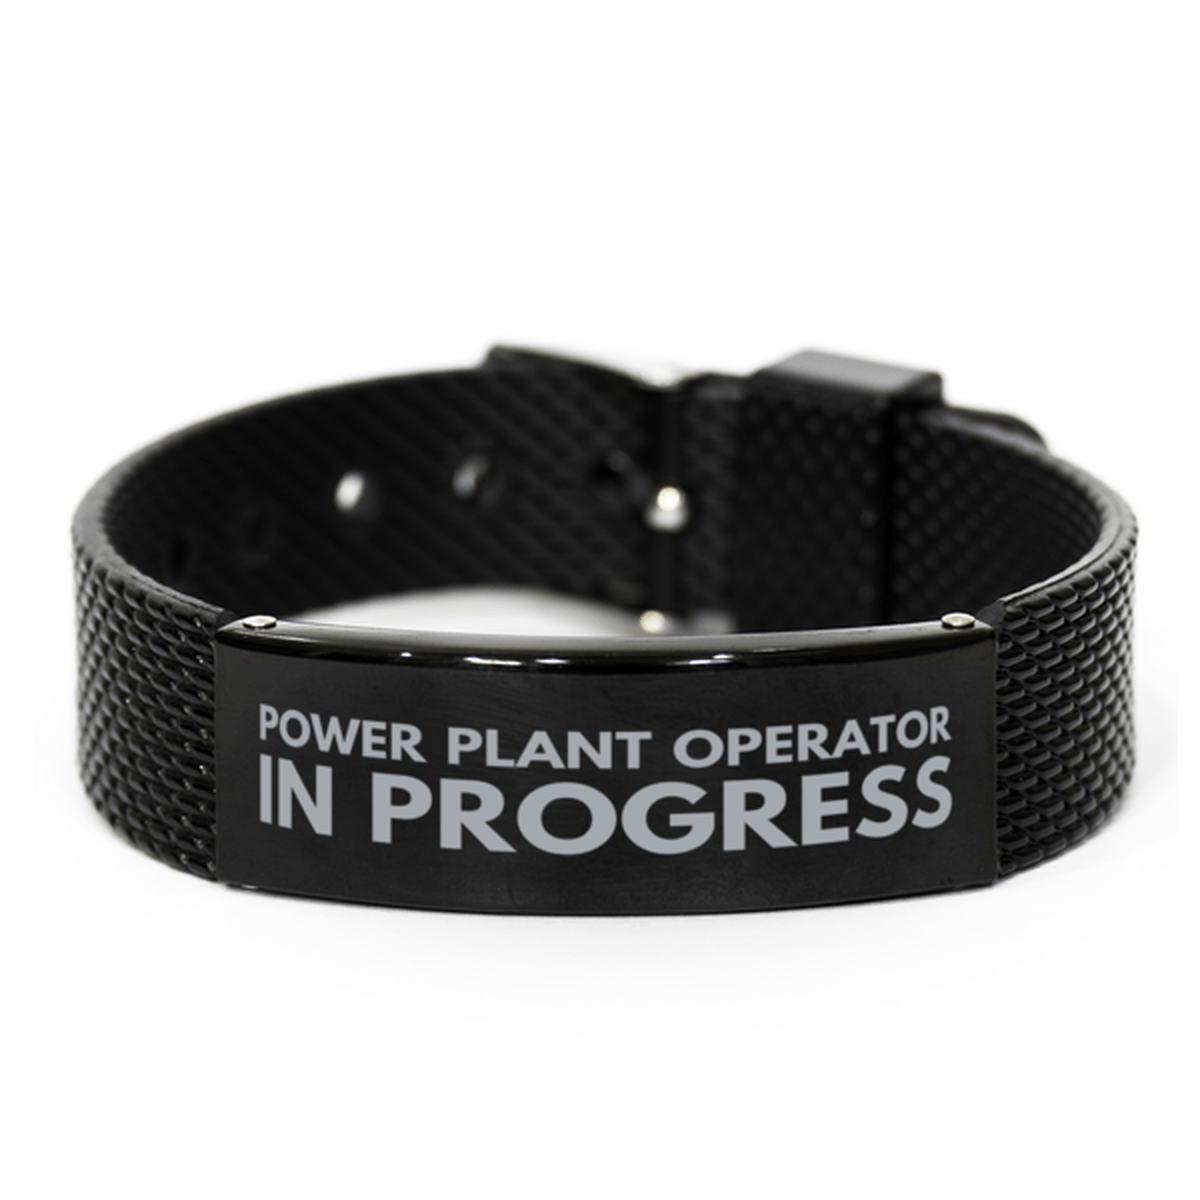 Inspirational Power Plant Operator Black Shark Mesh Bracelet, Power Plant Operator In Progress, Best Graduation Gifts for Students